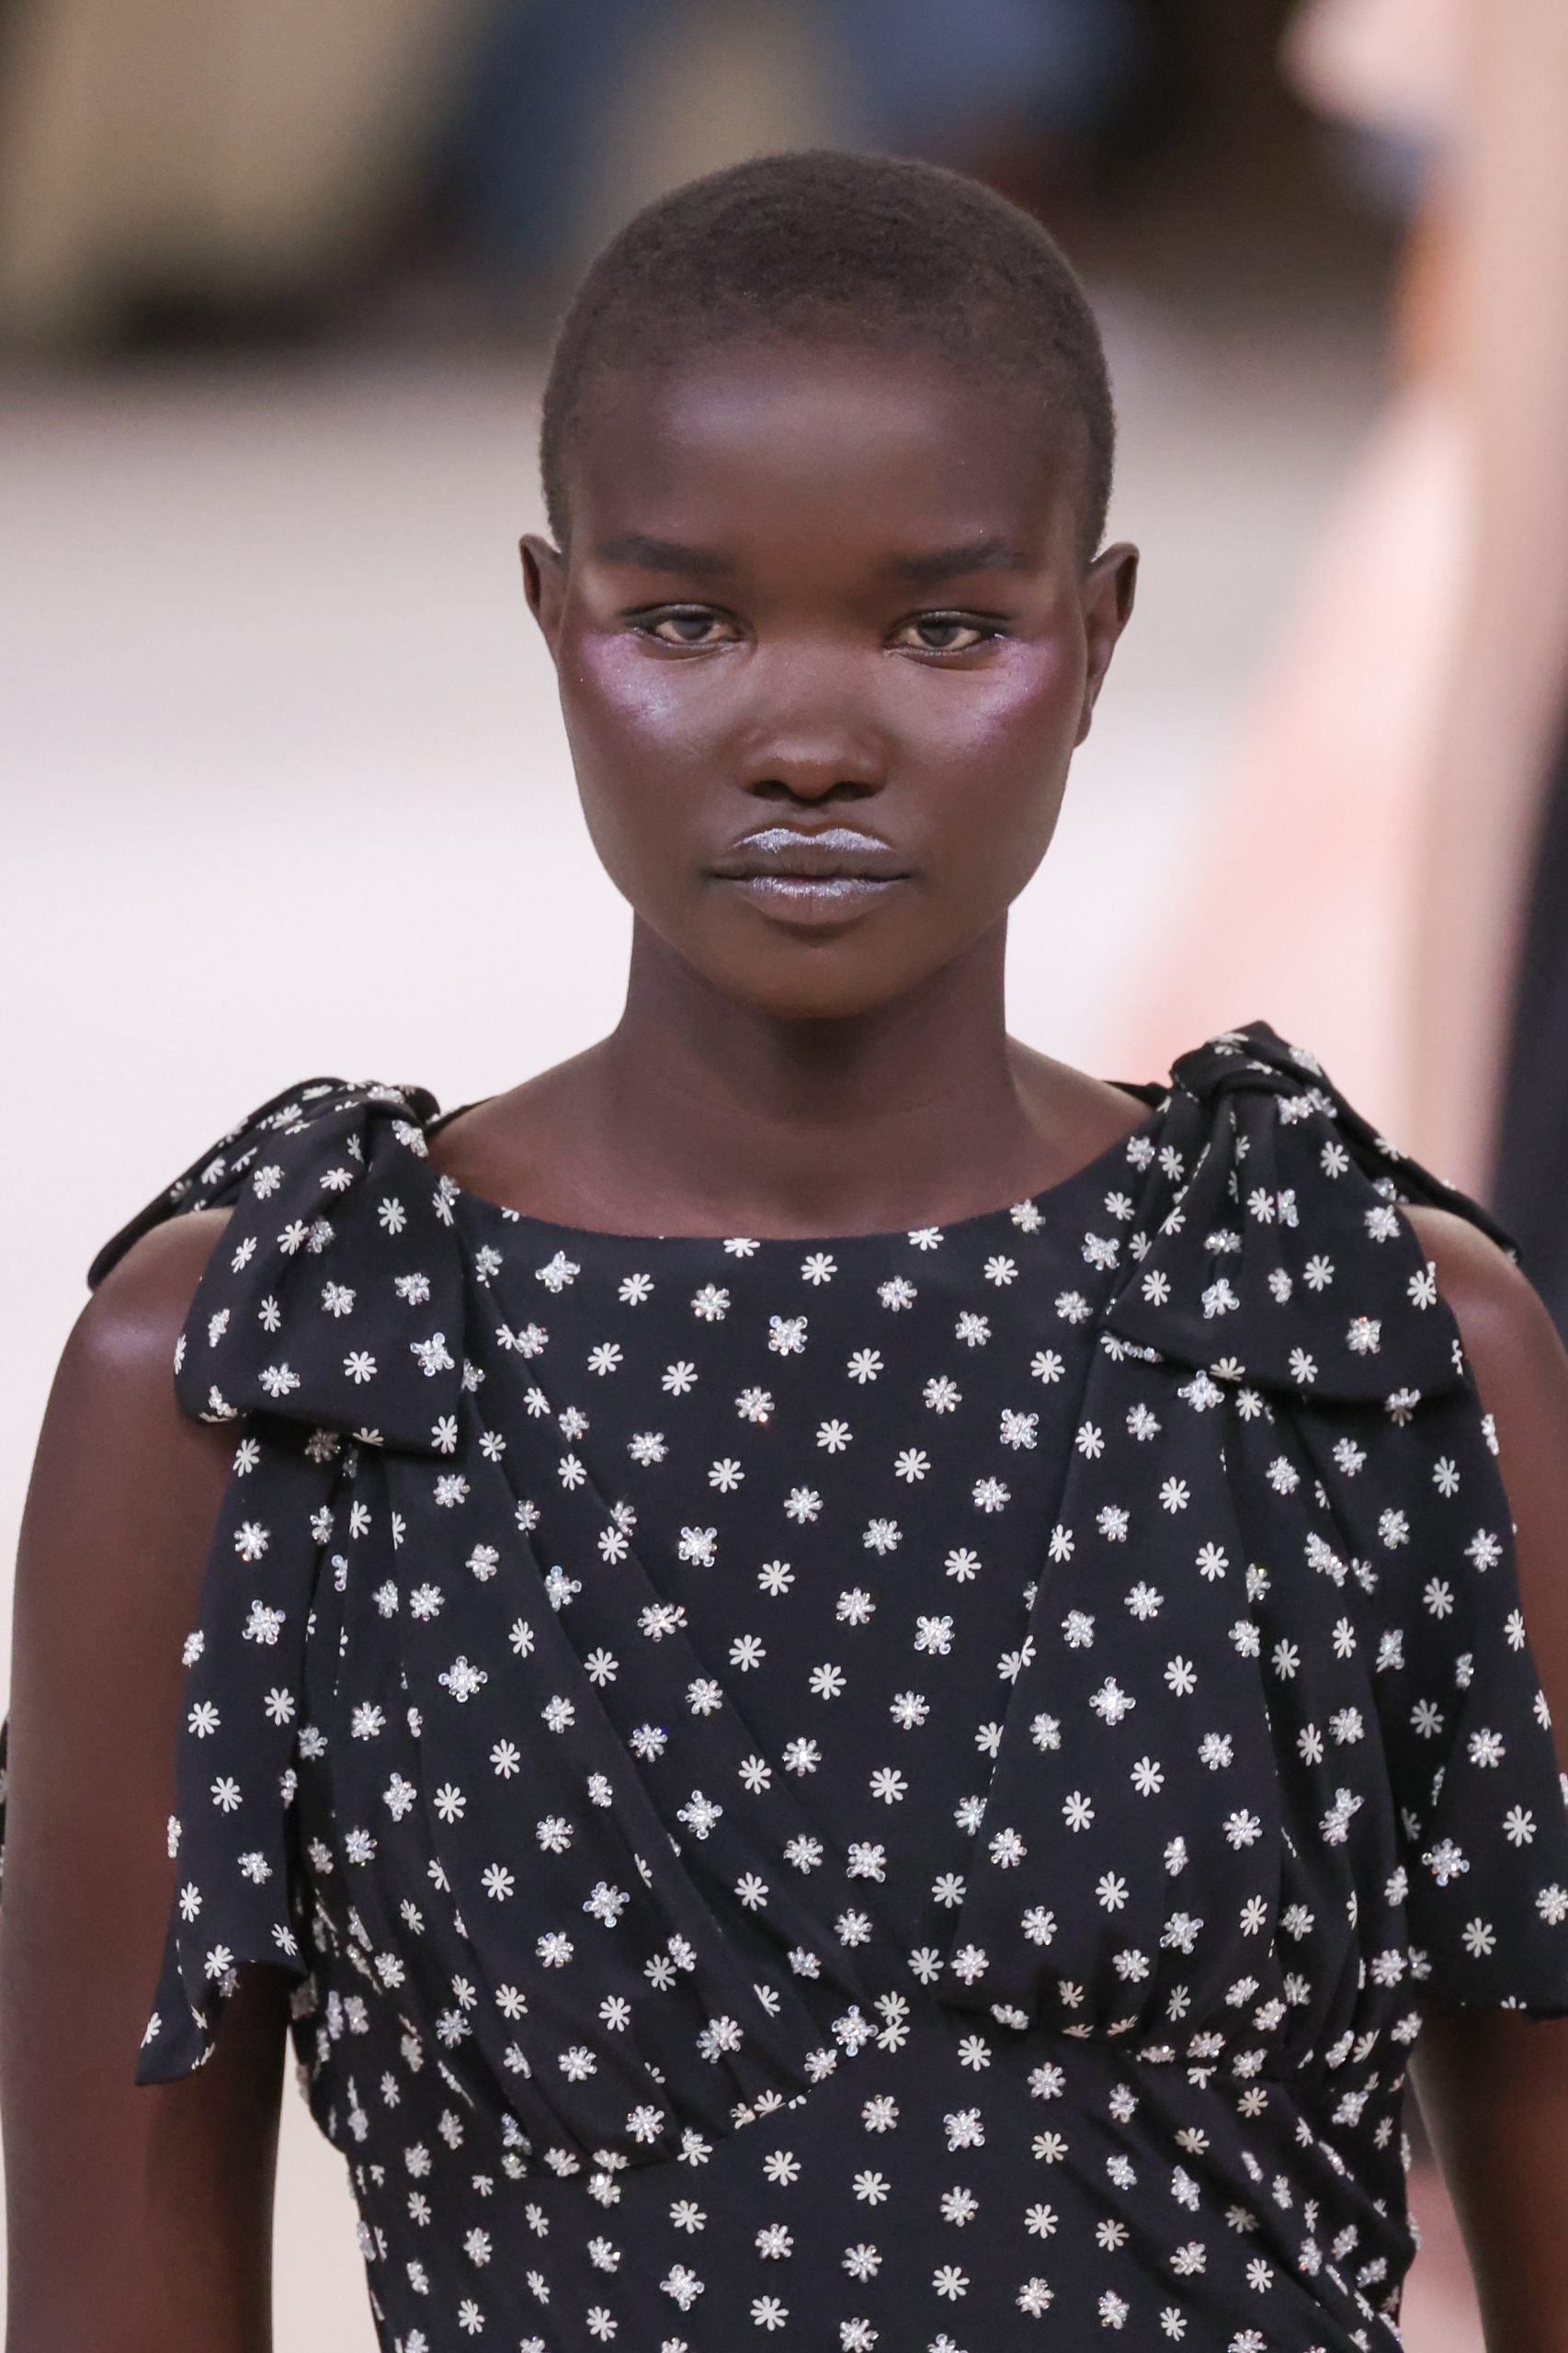 Chanel’s Couture Show Celebrated The Beauty In Imperfection